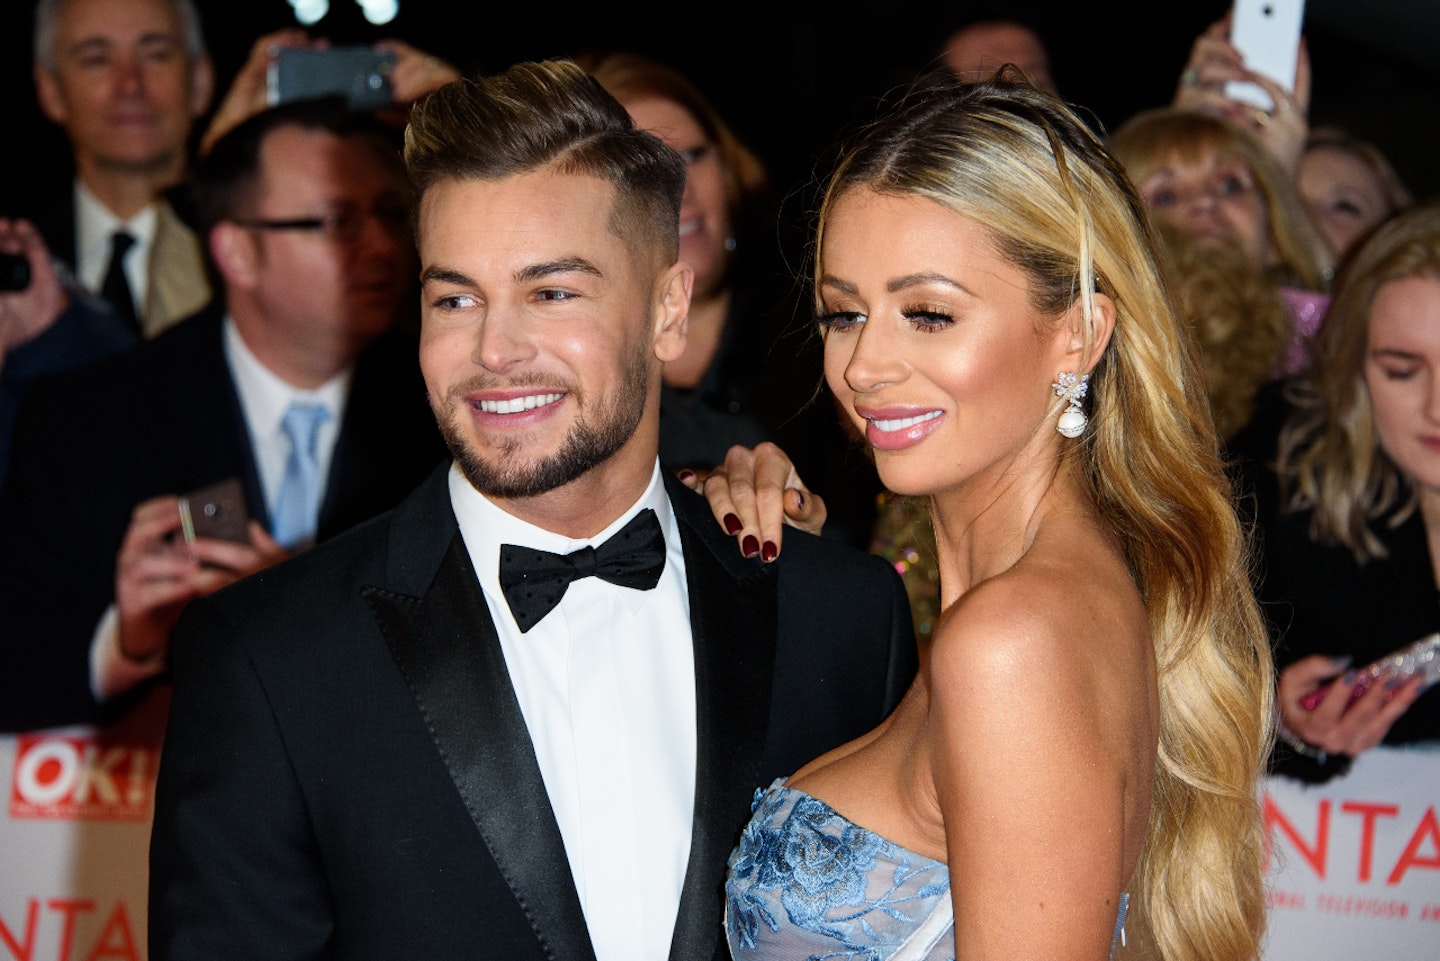 Olivia Attwood and Chris Hughes on the red carpet at the NTAs